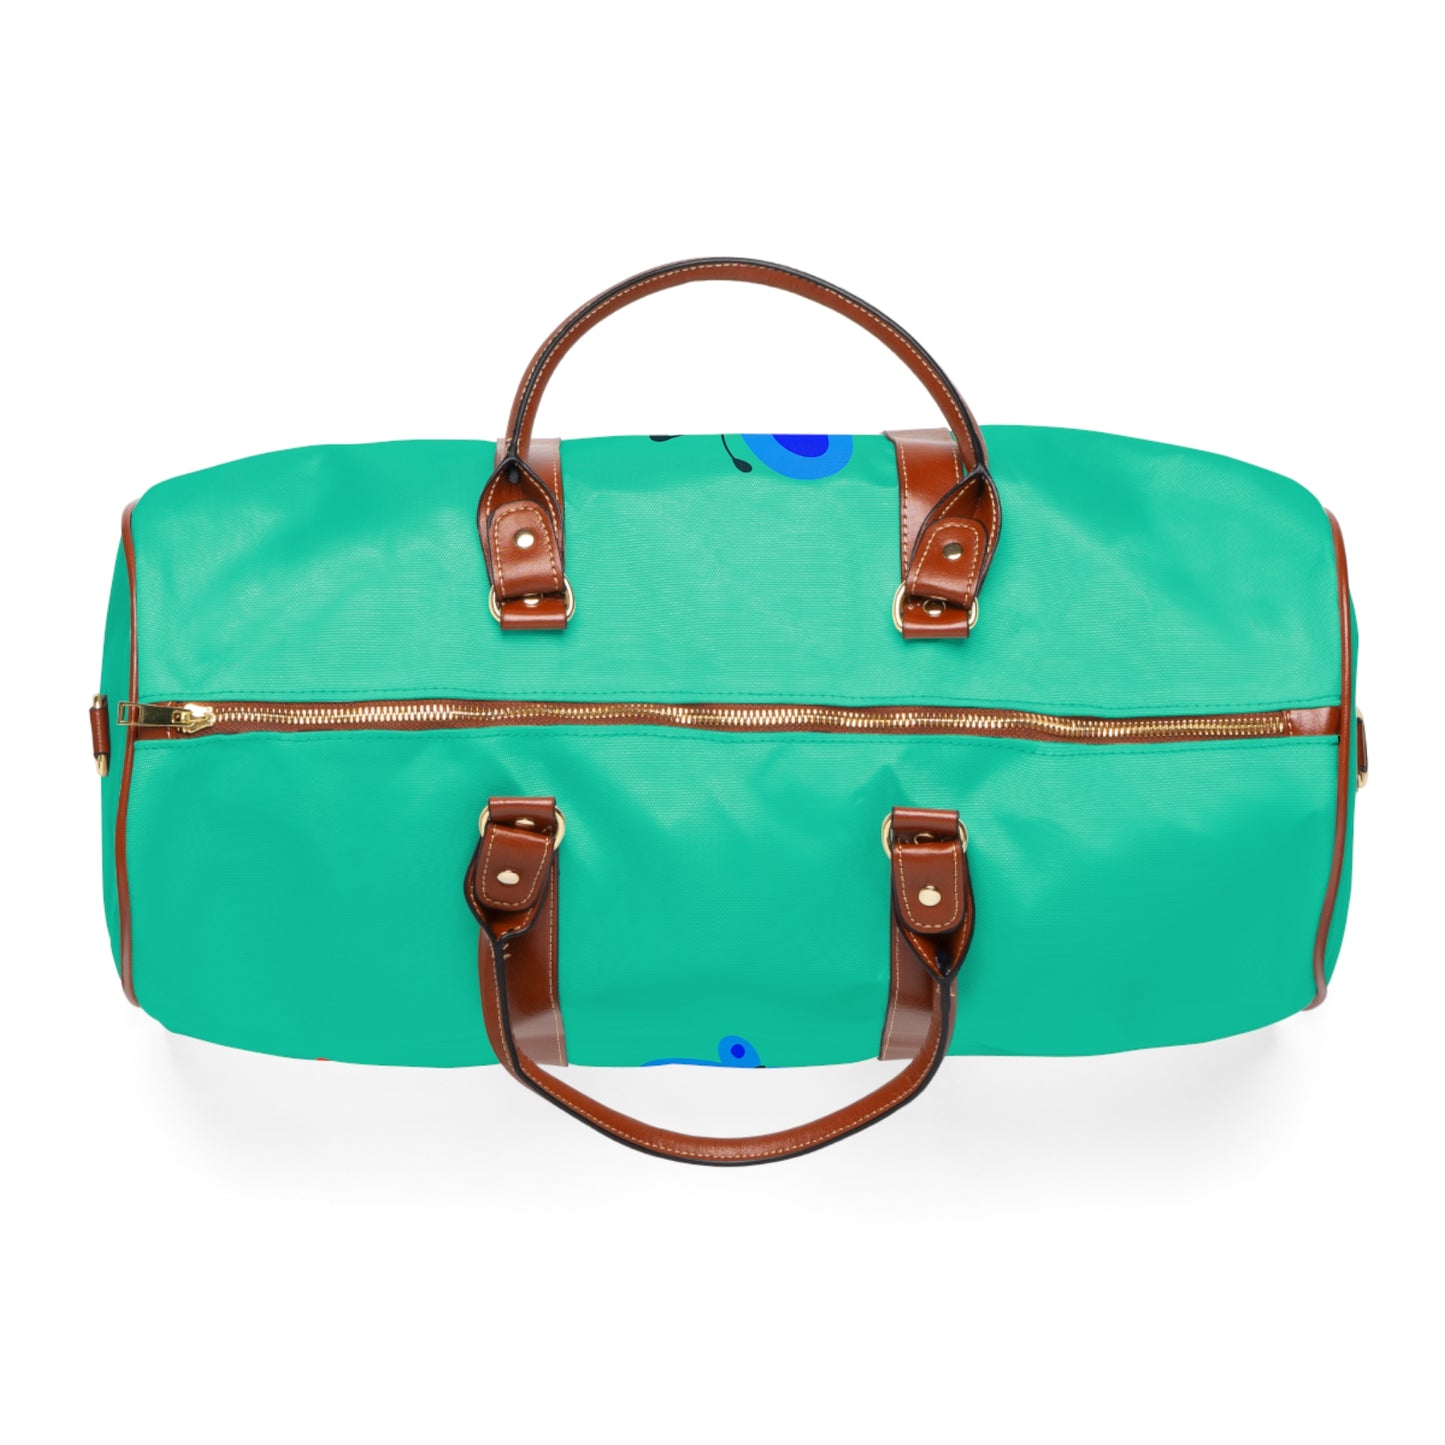 Bright Summer flowers - Turquoise 40e0d0 - Waterproof Travel Bag